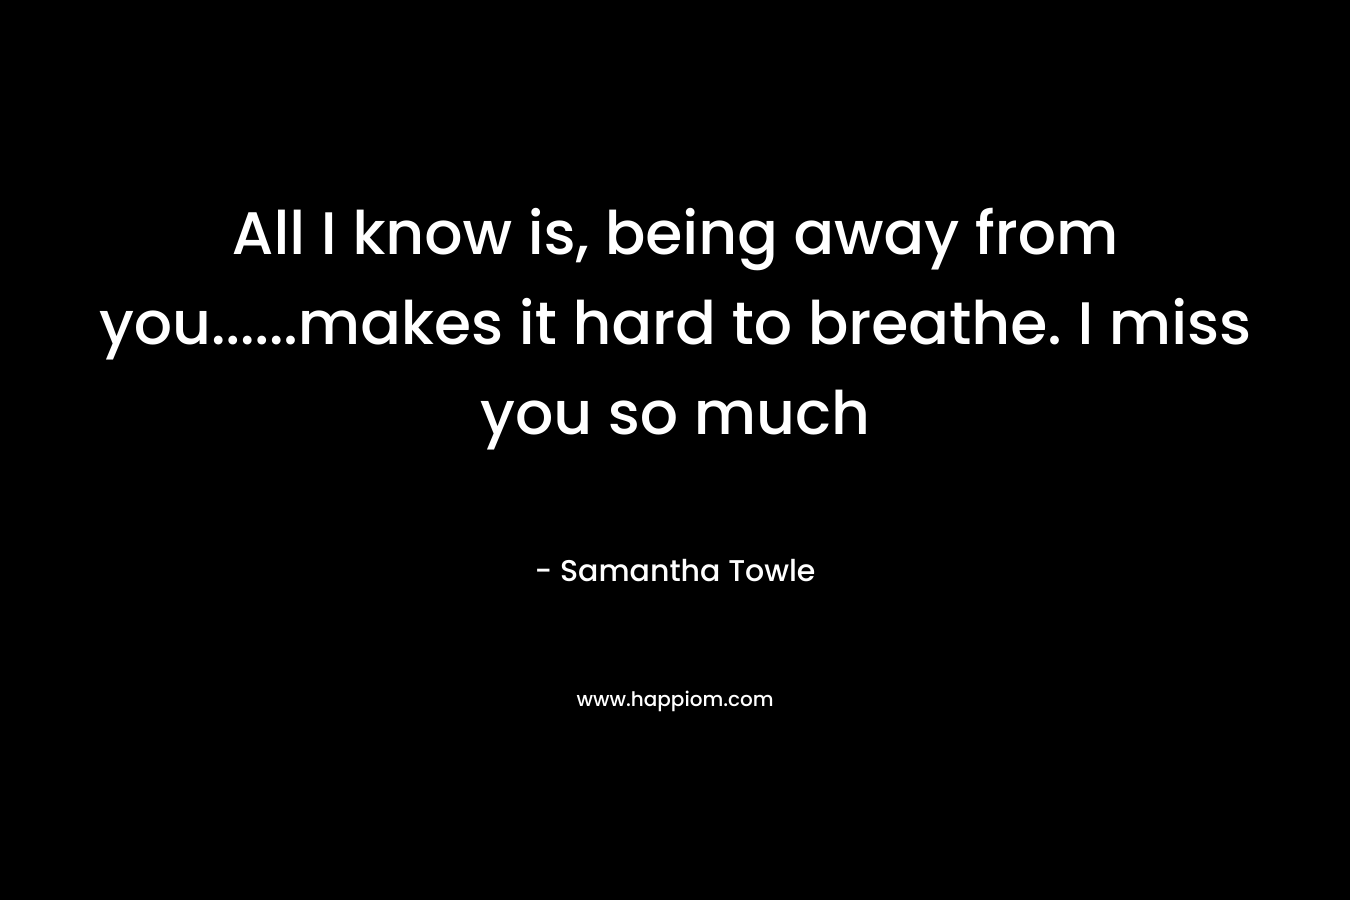 All I know is, being away from you……makes it hard to breathe. I miss you so much – Samantha Towle